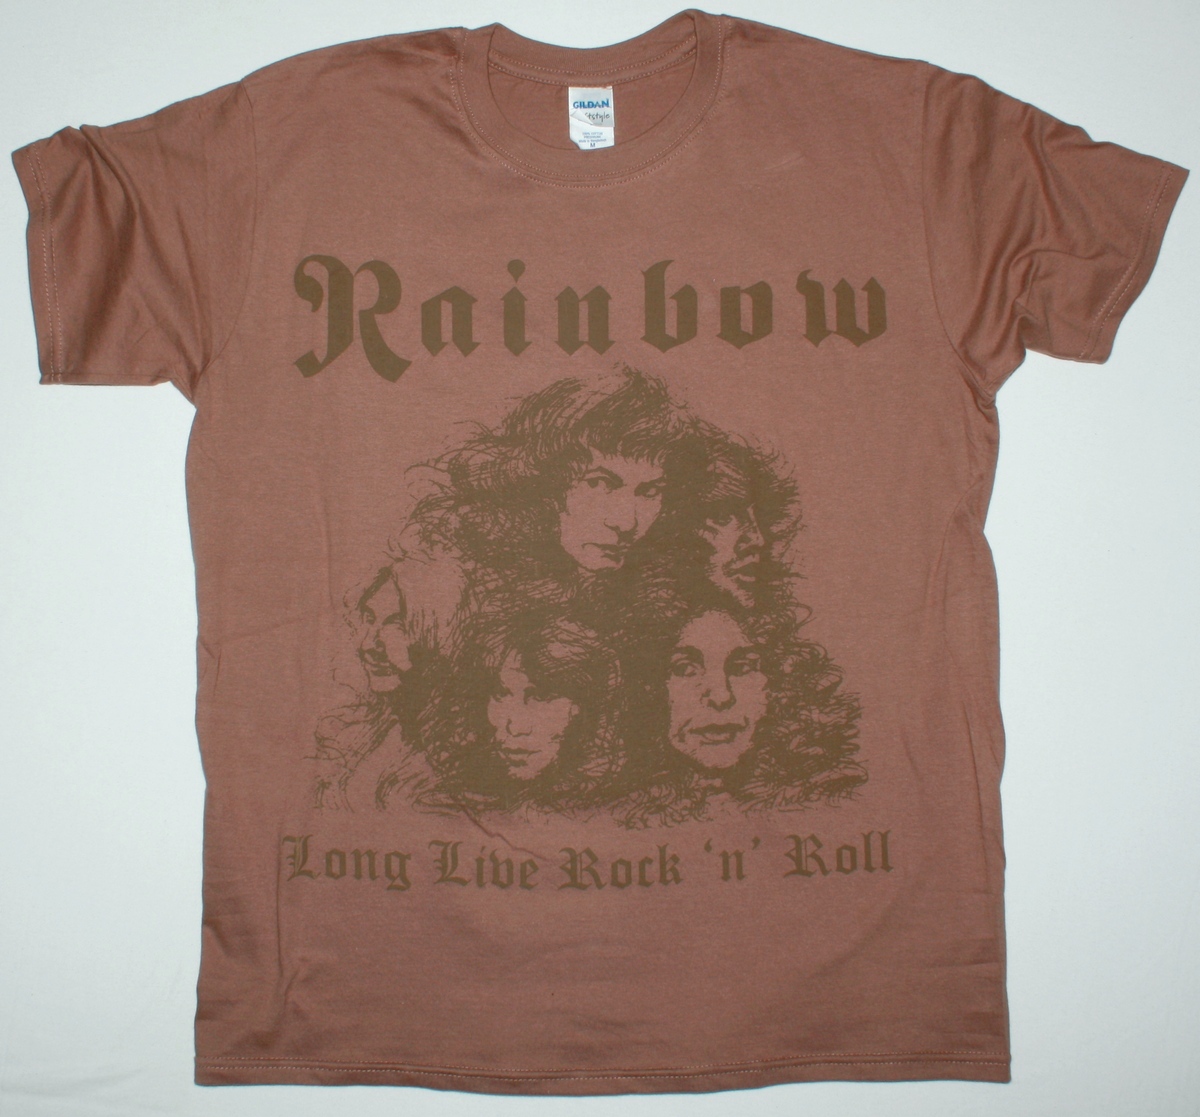 RAINBOW LONG LIVE ROCK'N'ROLL'78 RITCHIE BLACKMORE DIO NEW BROWN T